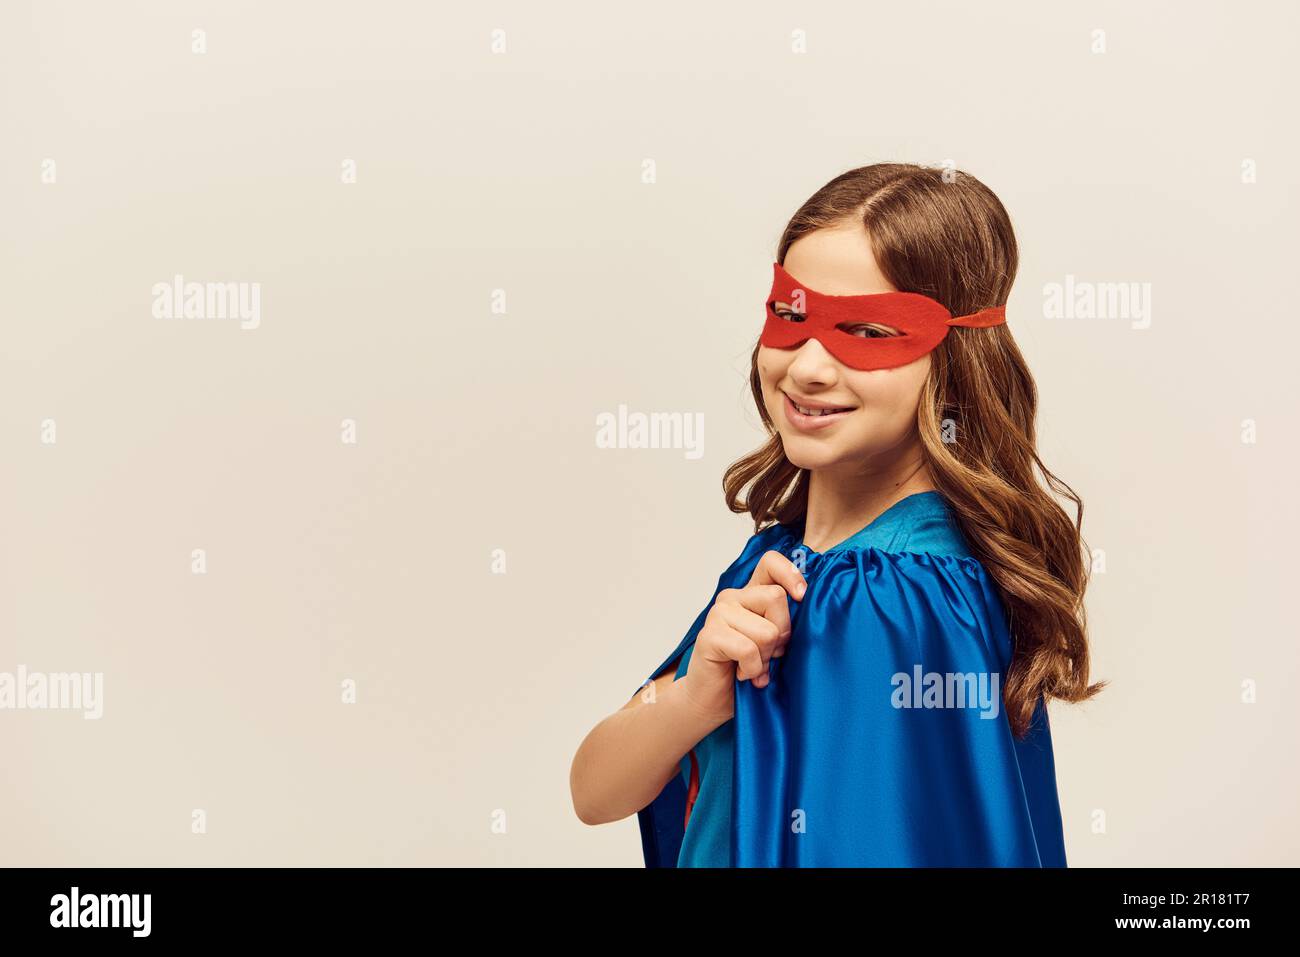 happy girl in superhero costume with blue cloak and red mask on face looking at camera and smiling while celebrating International children's day on g Stock Photo